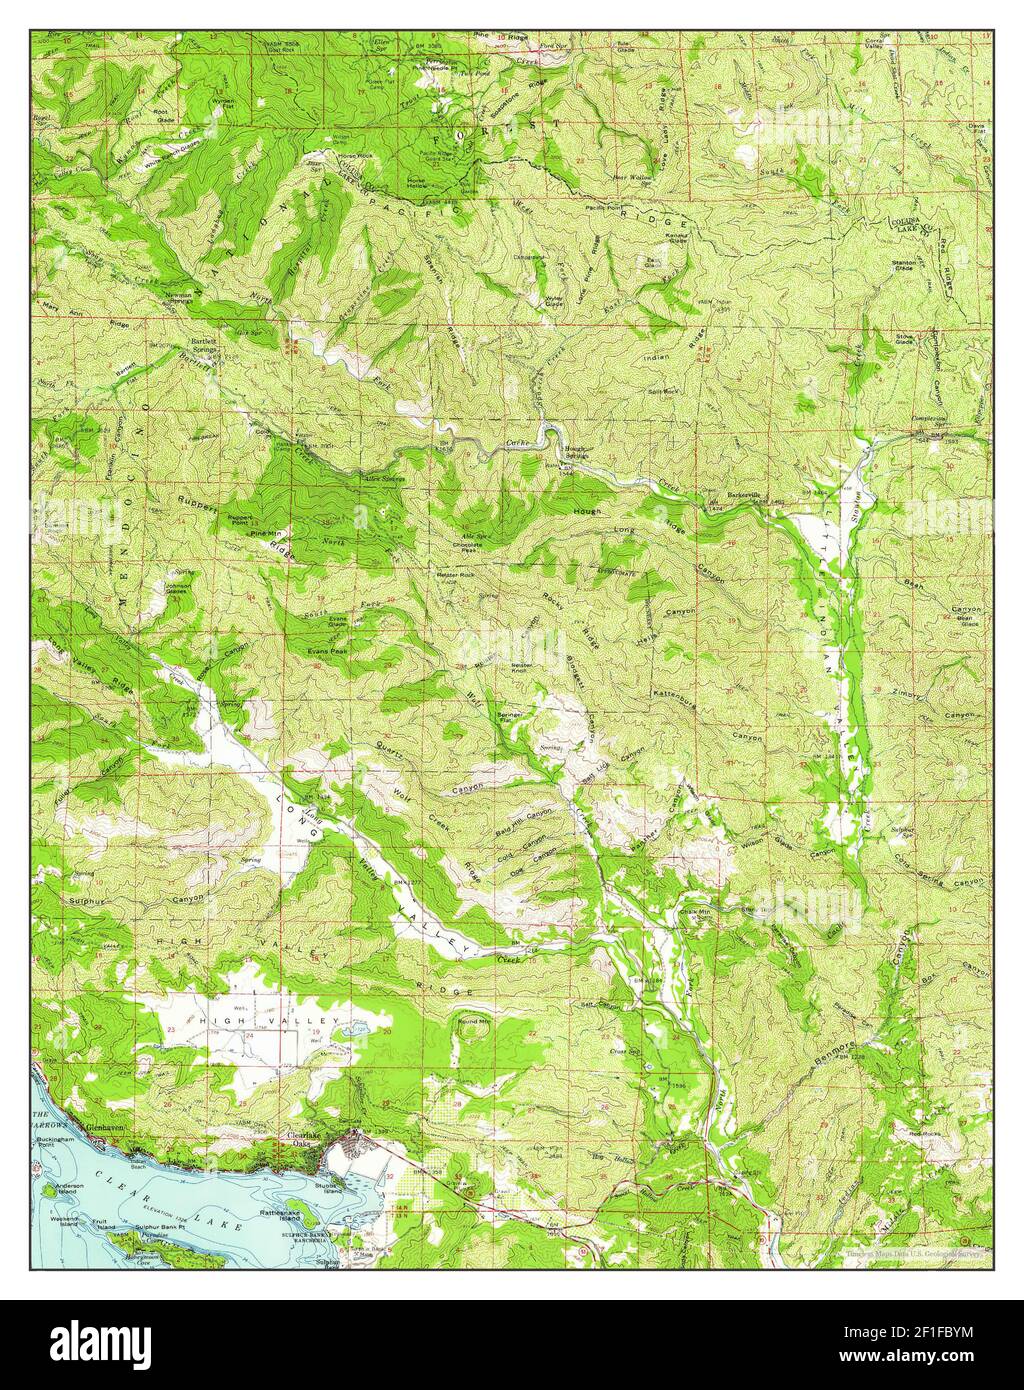 Clearlake Oaks, California, map 1960, 1:62500, United States of America by Timeless Maps, data U.S. Geological Survey Stock Photo